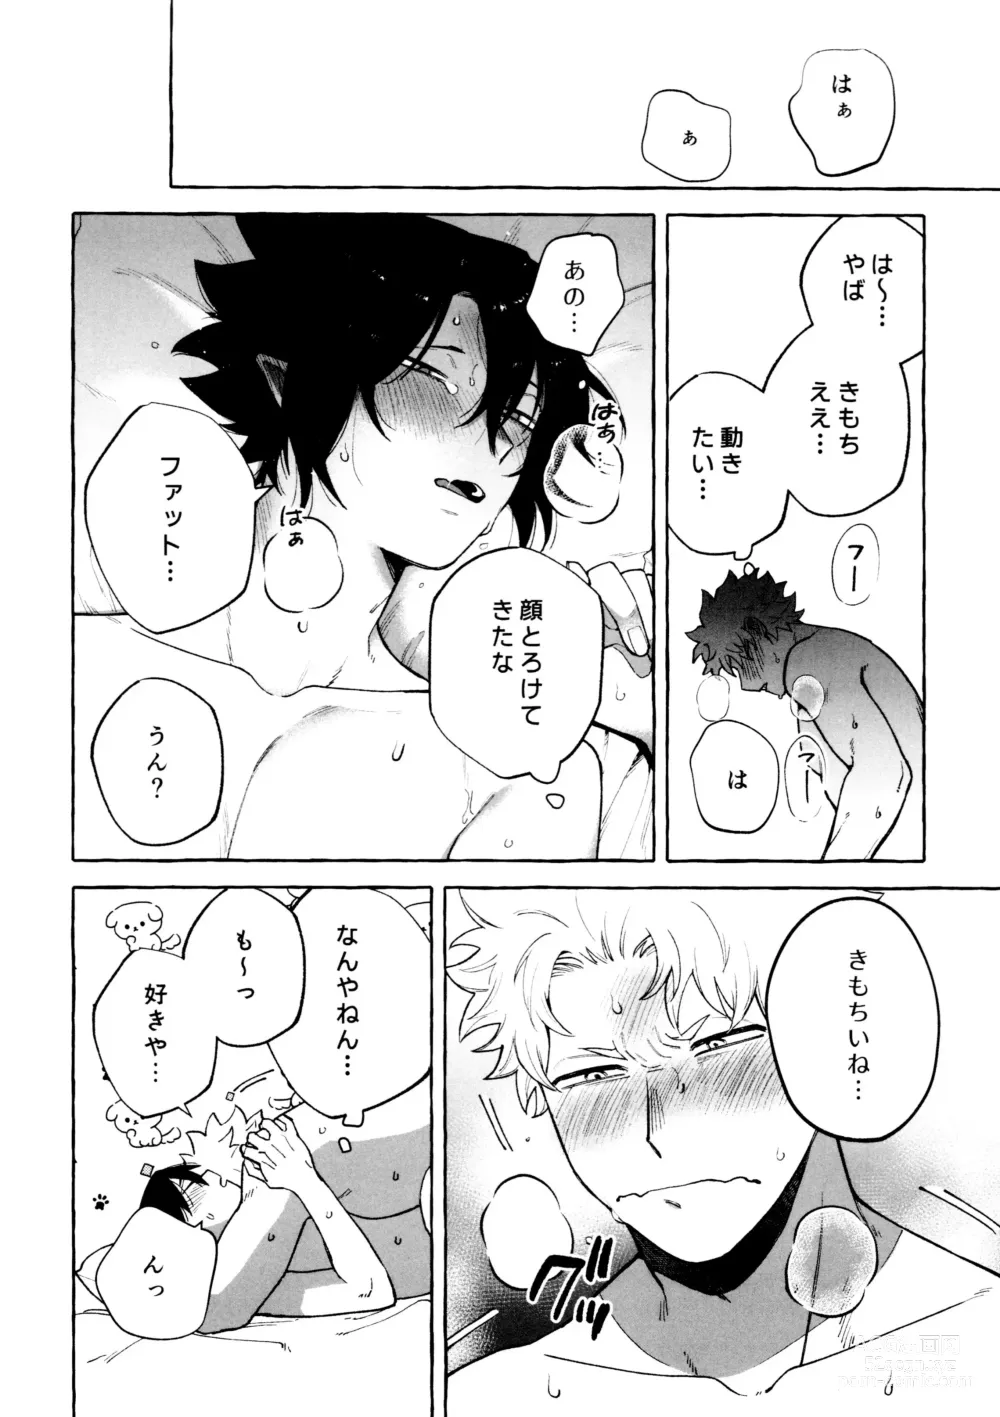 Page 20 of doujinshi Please please